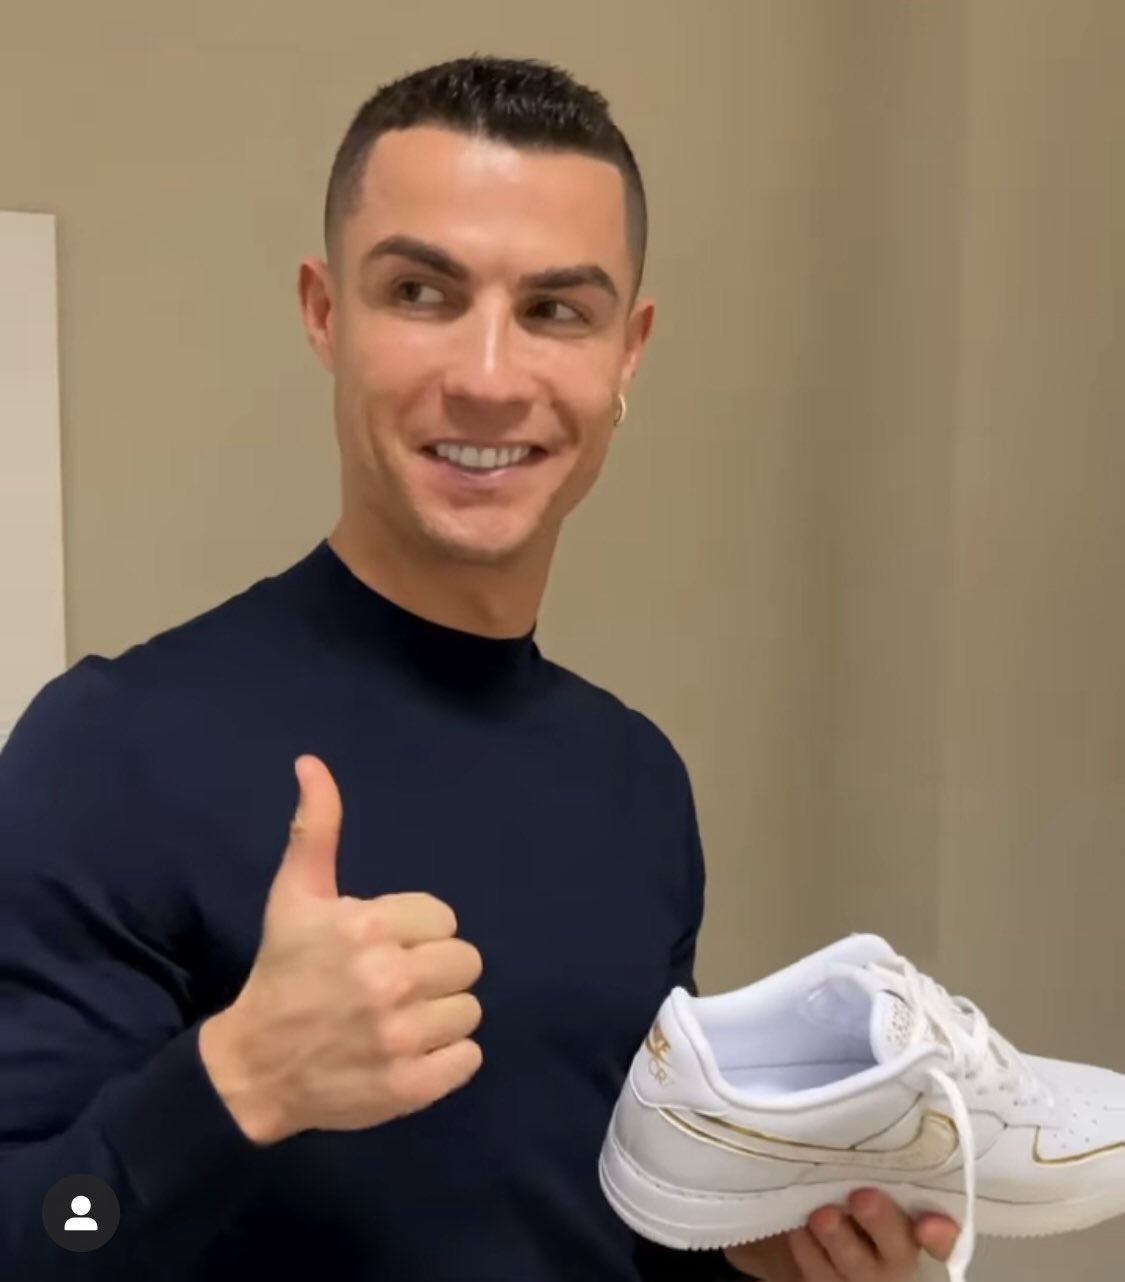 The CR7 Timeline. on X: 🎁 Cristiano Ronaldo with a gift from